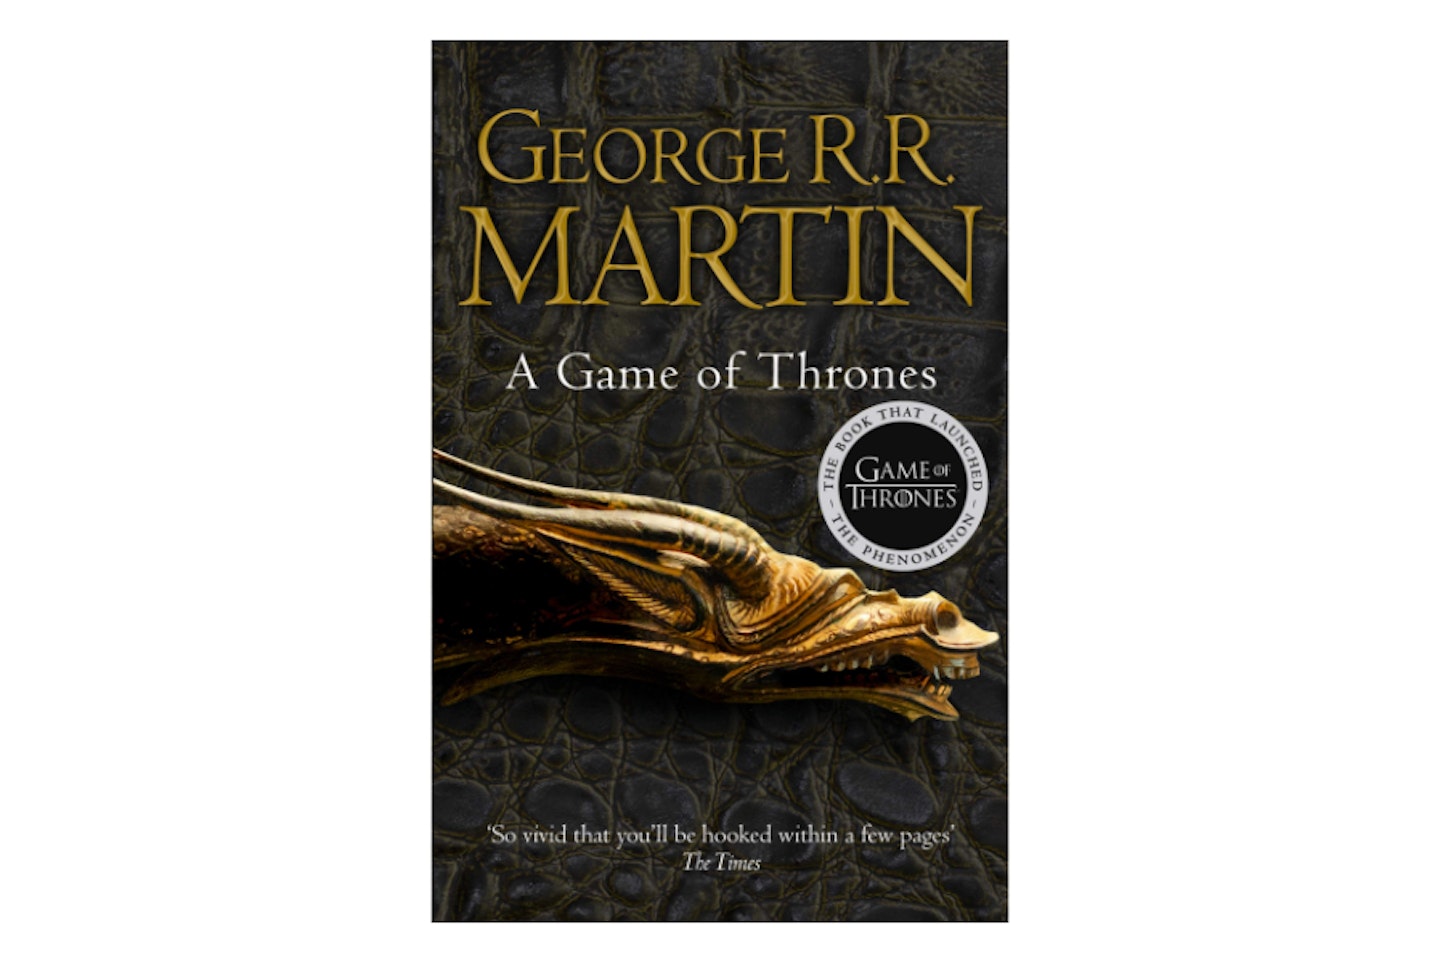 A Game of Thrones by George R.R. Martin